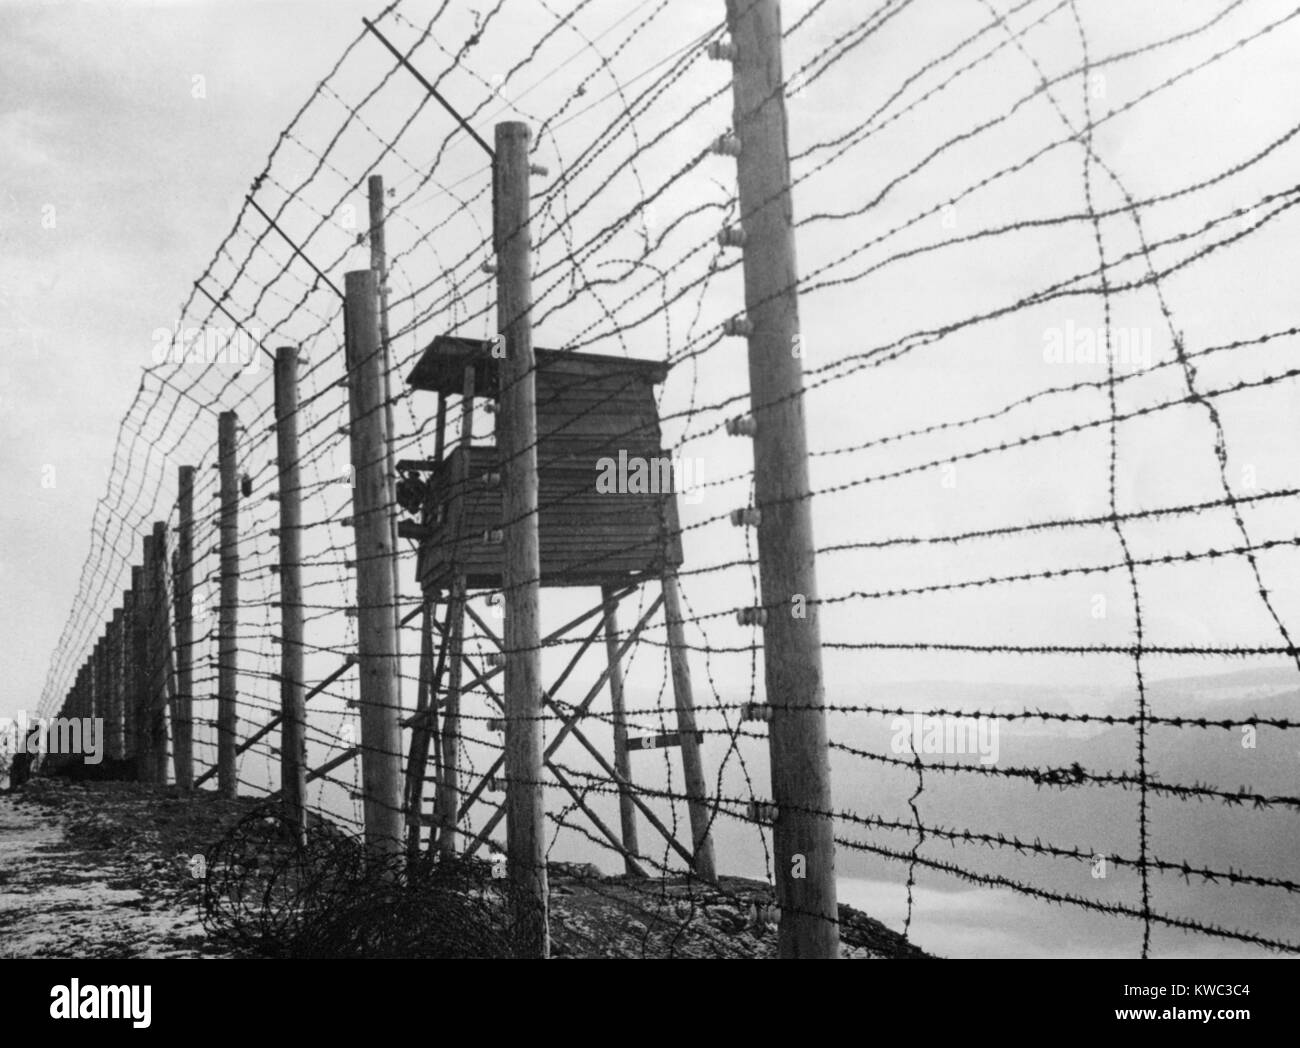 Electrified barbed wire fence and guard house at Struthof Concentration Camp near Natzweiler, France. The evacuated camp was discovered by the American Army, on Nov. 23, 1944. Most prisoners of the relatively small camp were anti-German resisters. (BSLOC 2015 13 4) Stock Photo